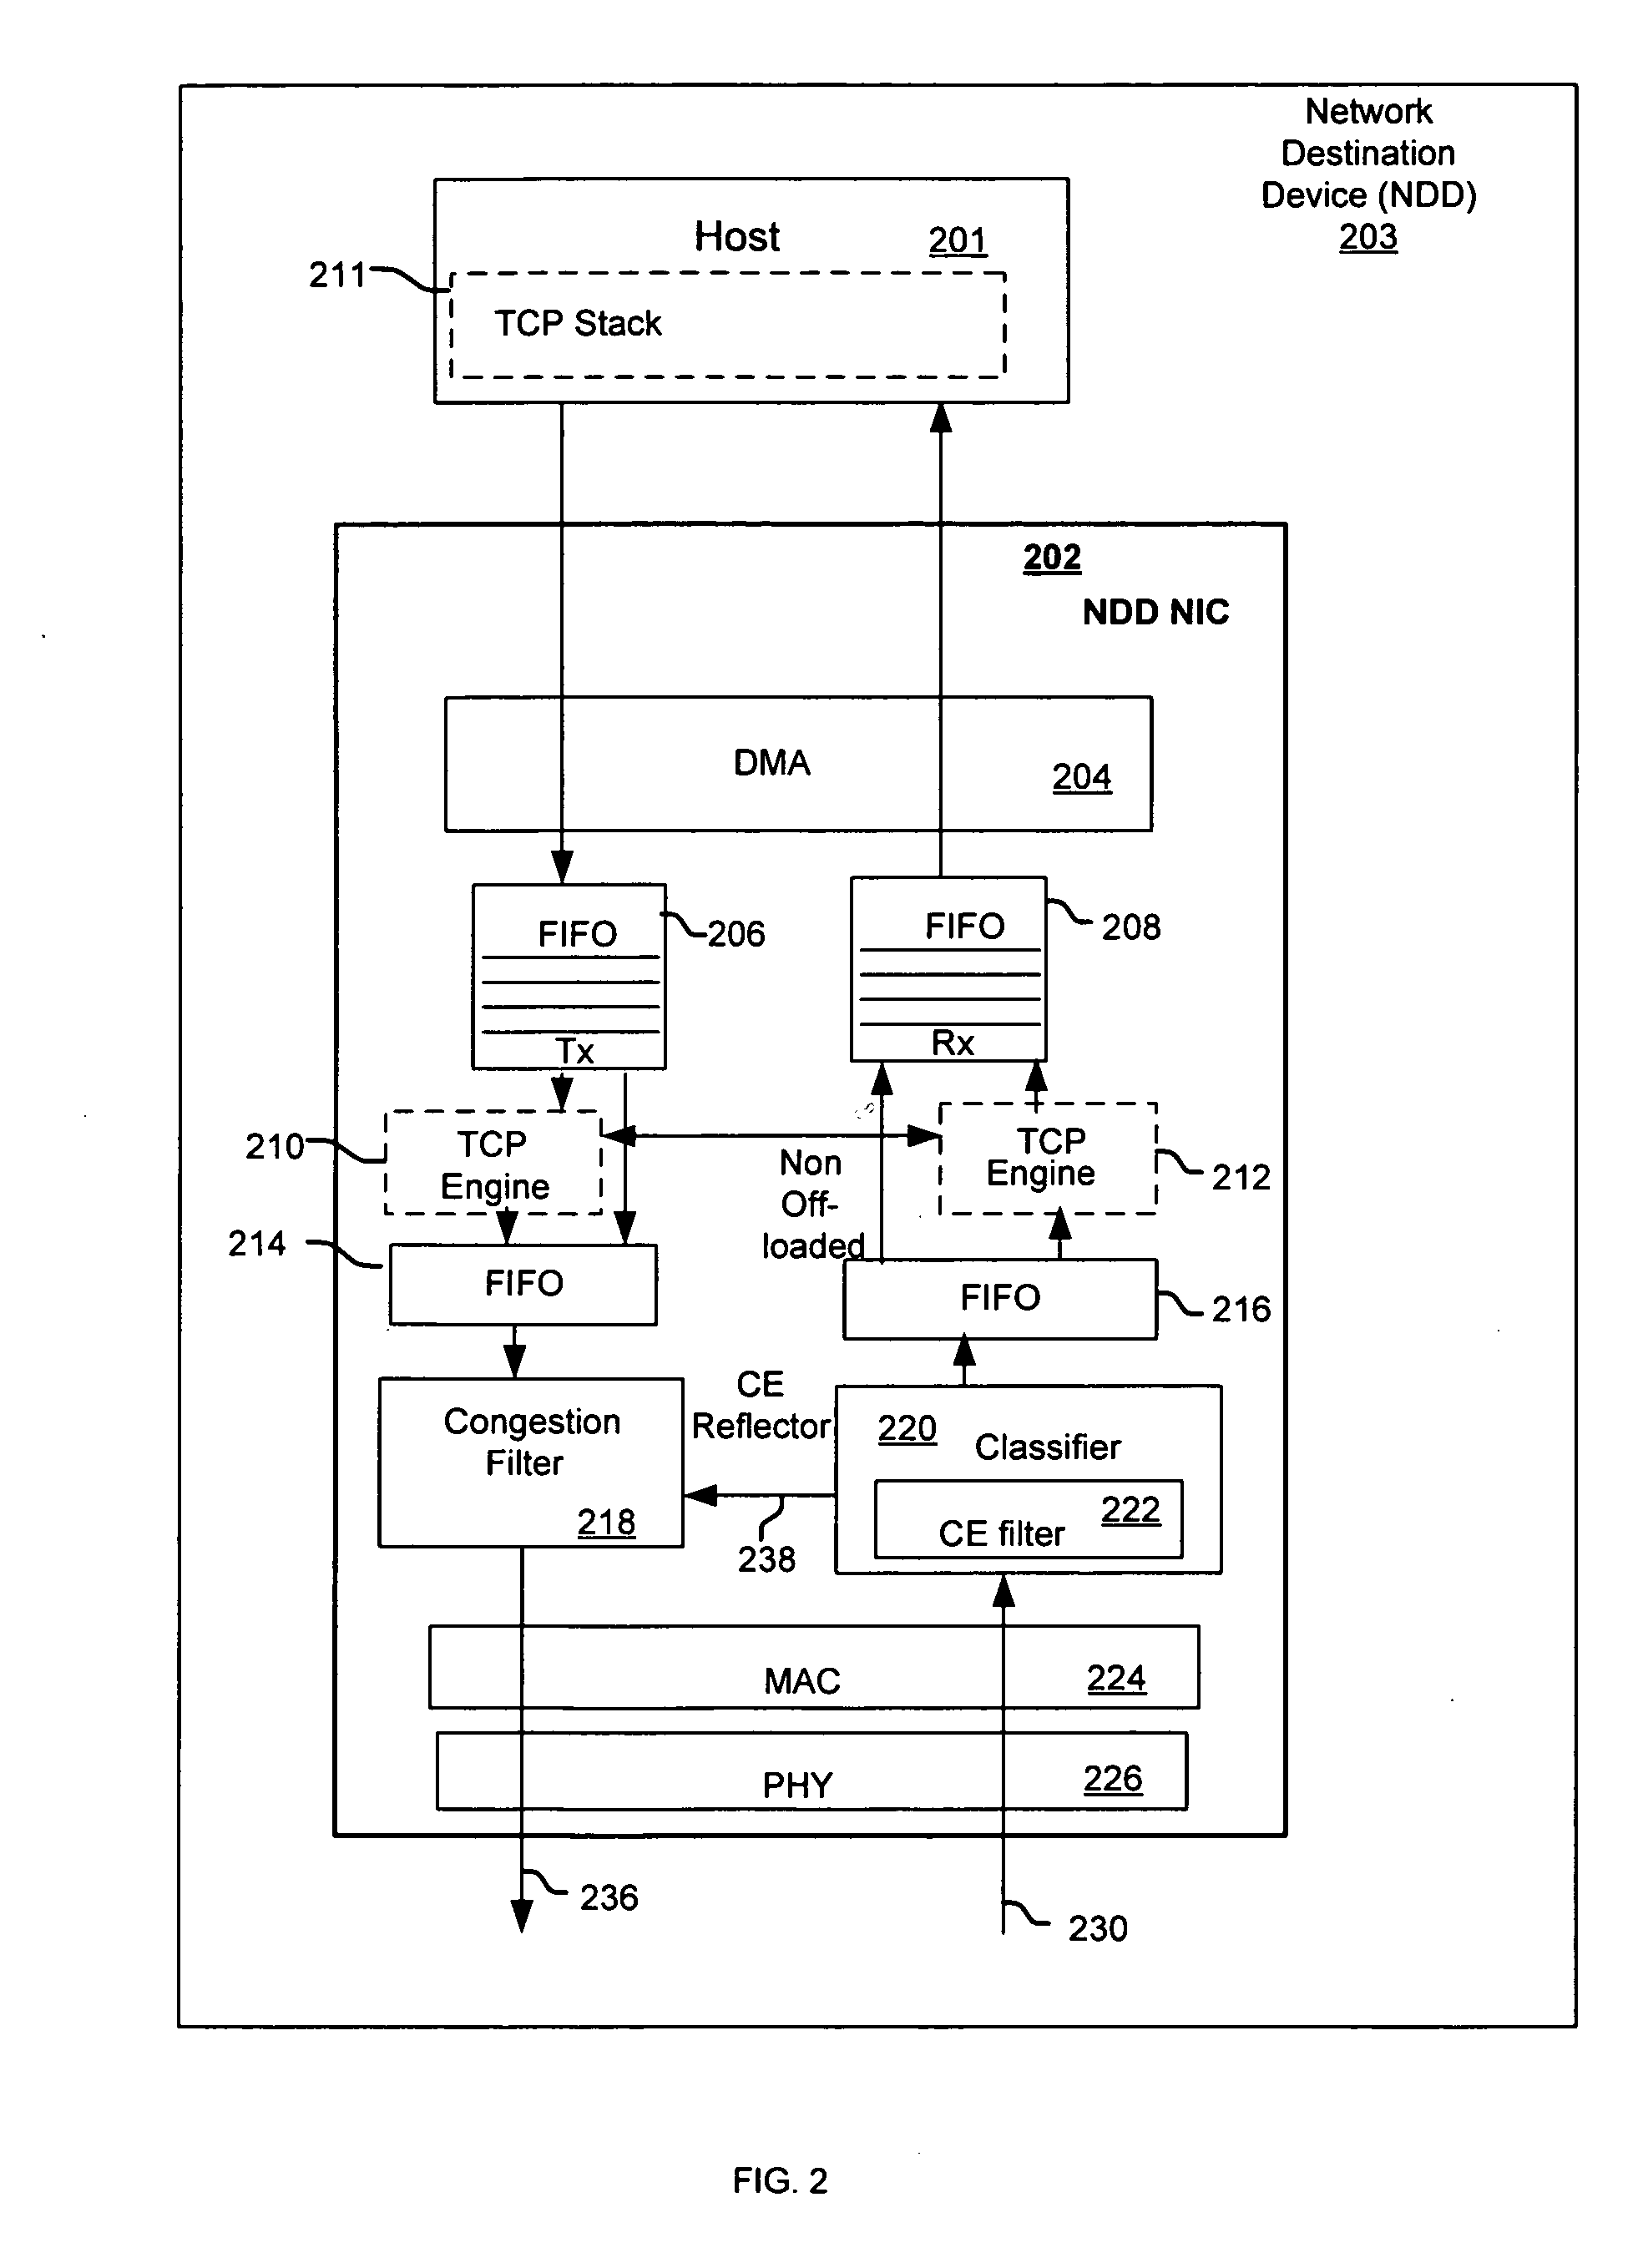 Method and system for reducing end station latency in response to network congestion